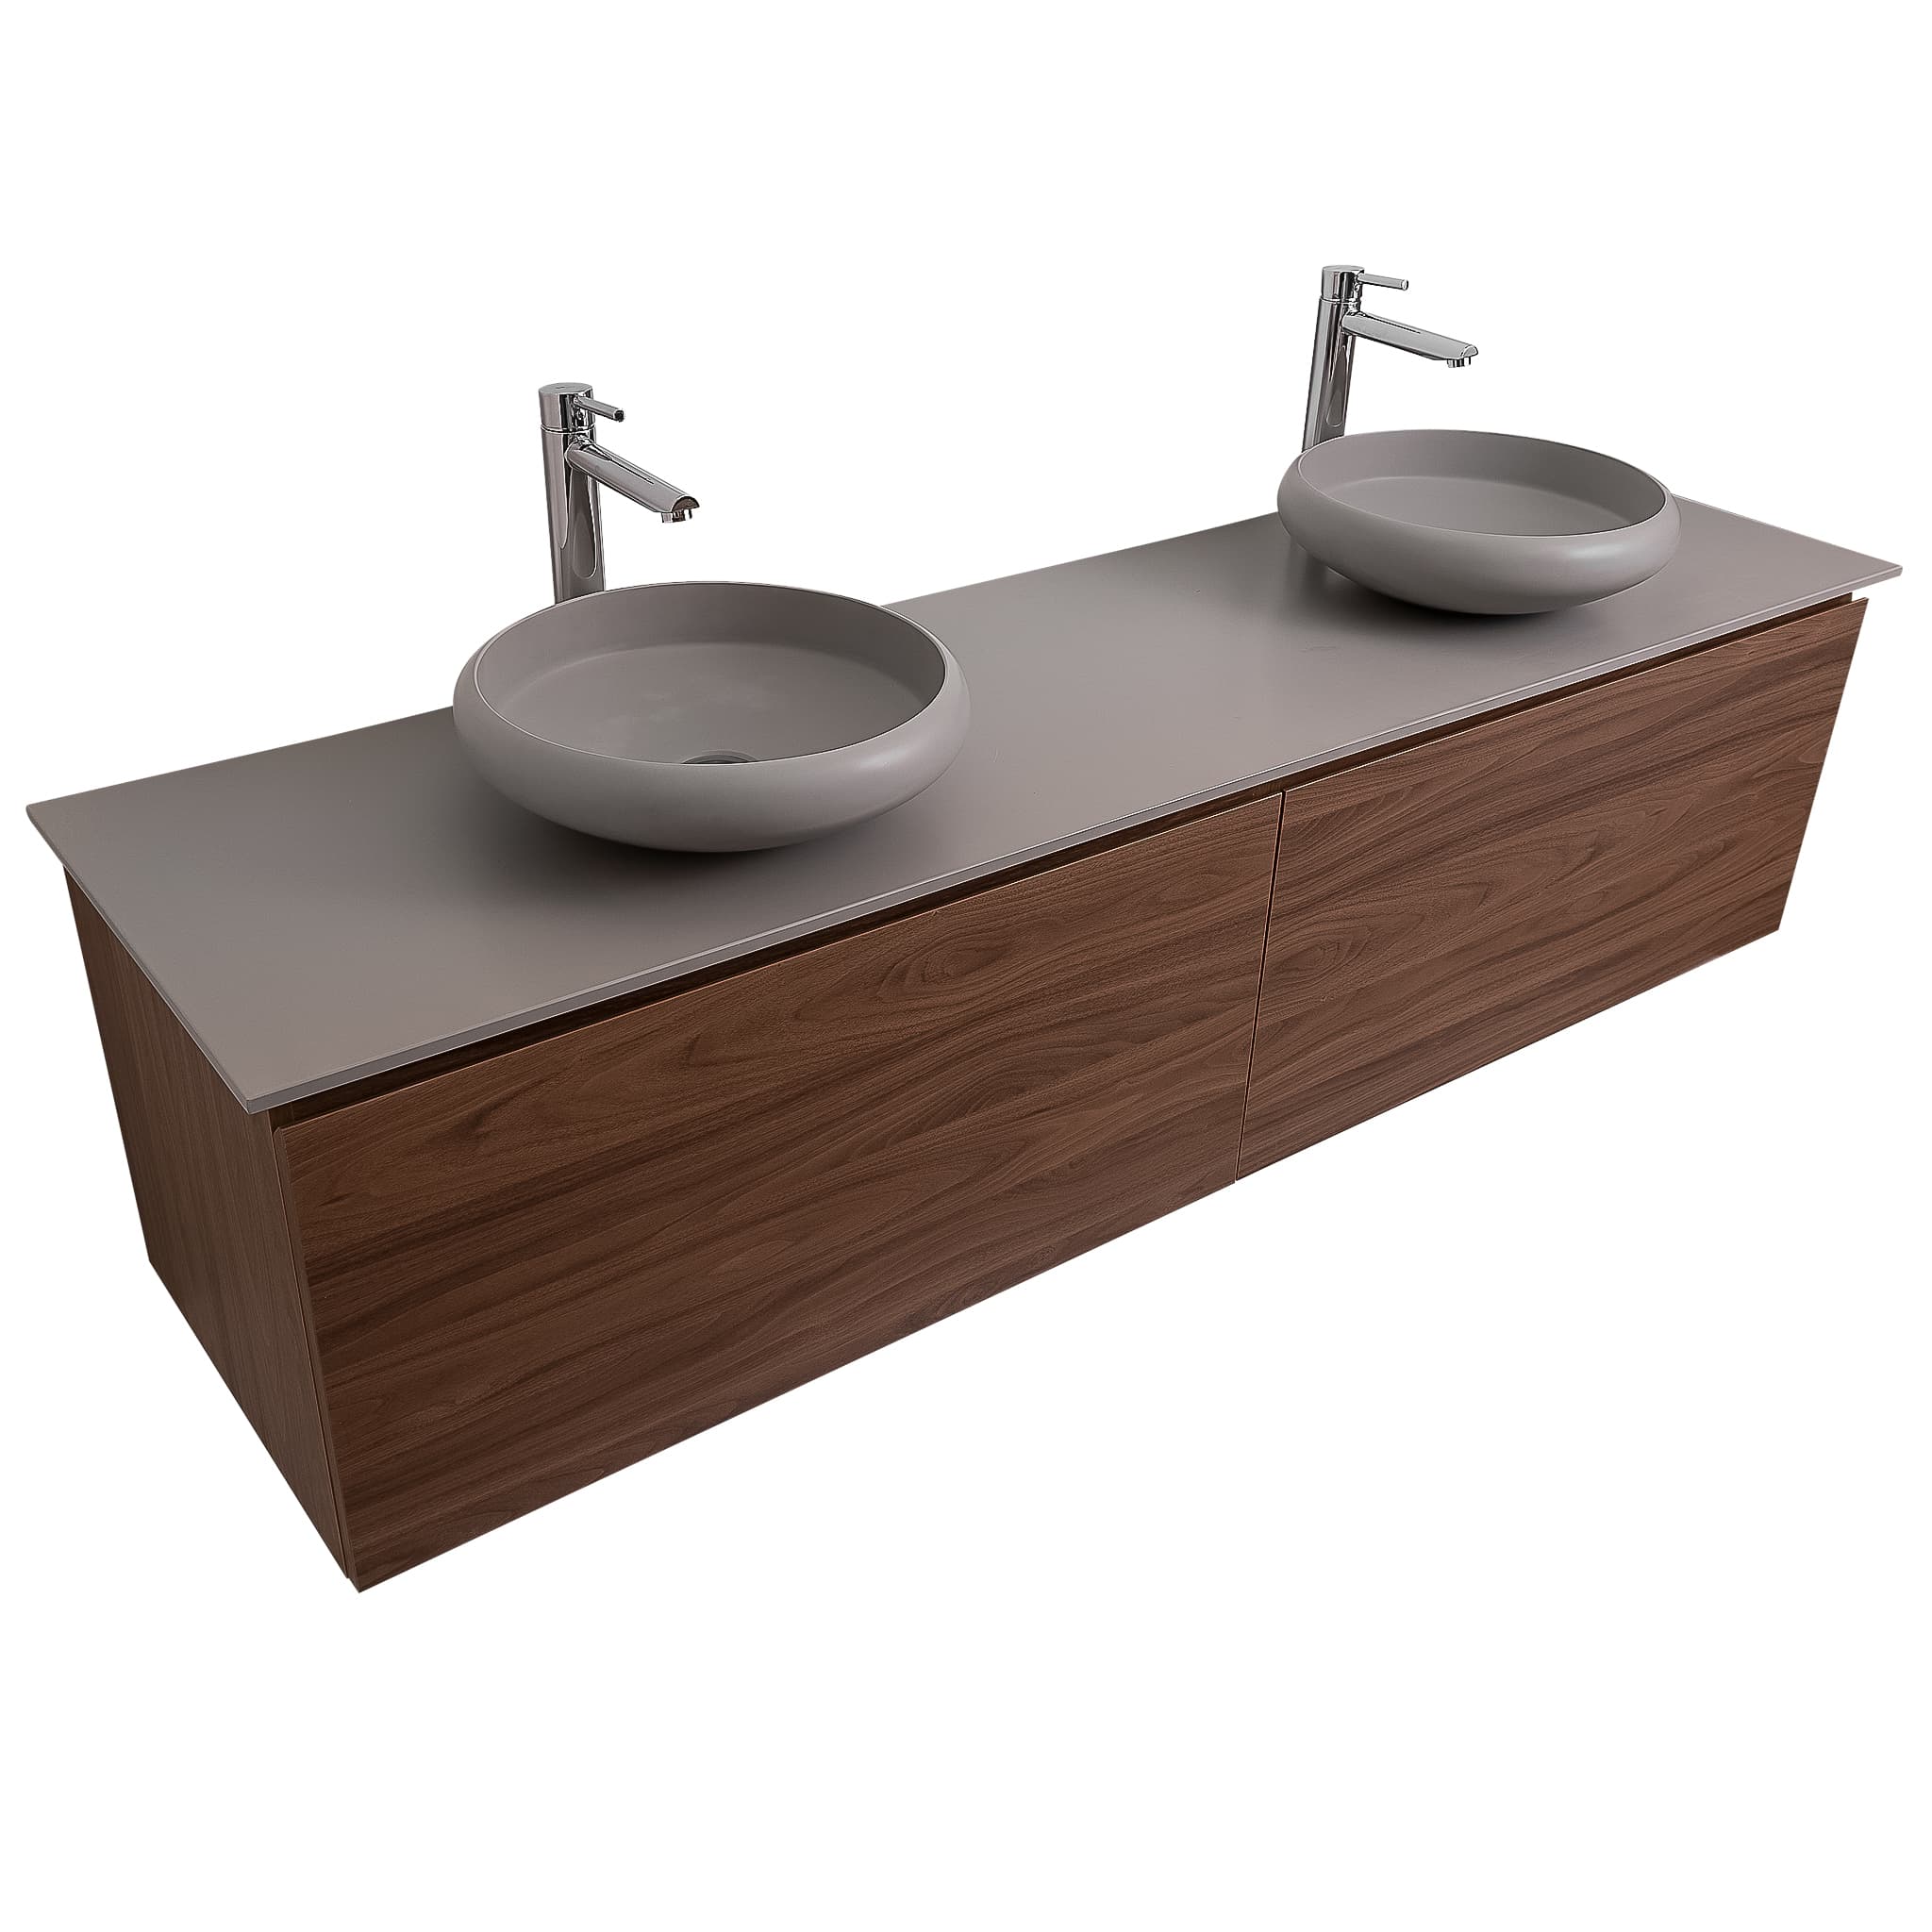 Venice 72 Walnut Wood Texture Cabinet, Solid Surface Flat Grey Counter And Two Round Solid Surface Grey Basin 1153, Wall Mounted Modern Vanity Set